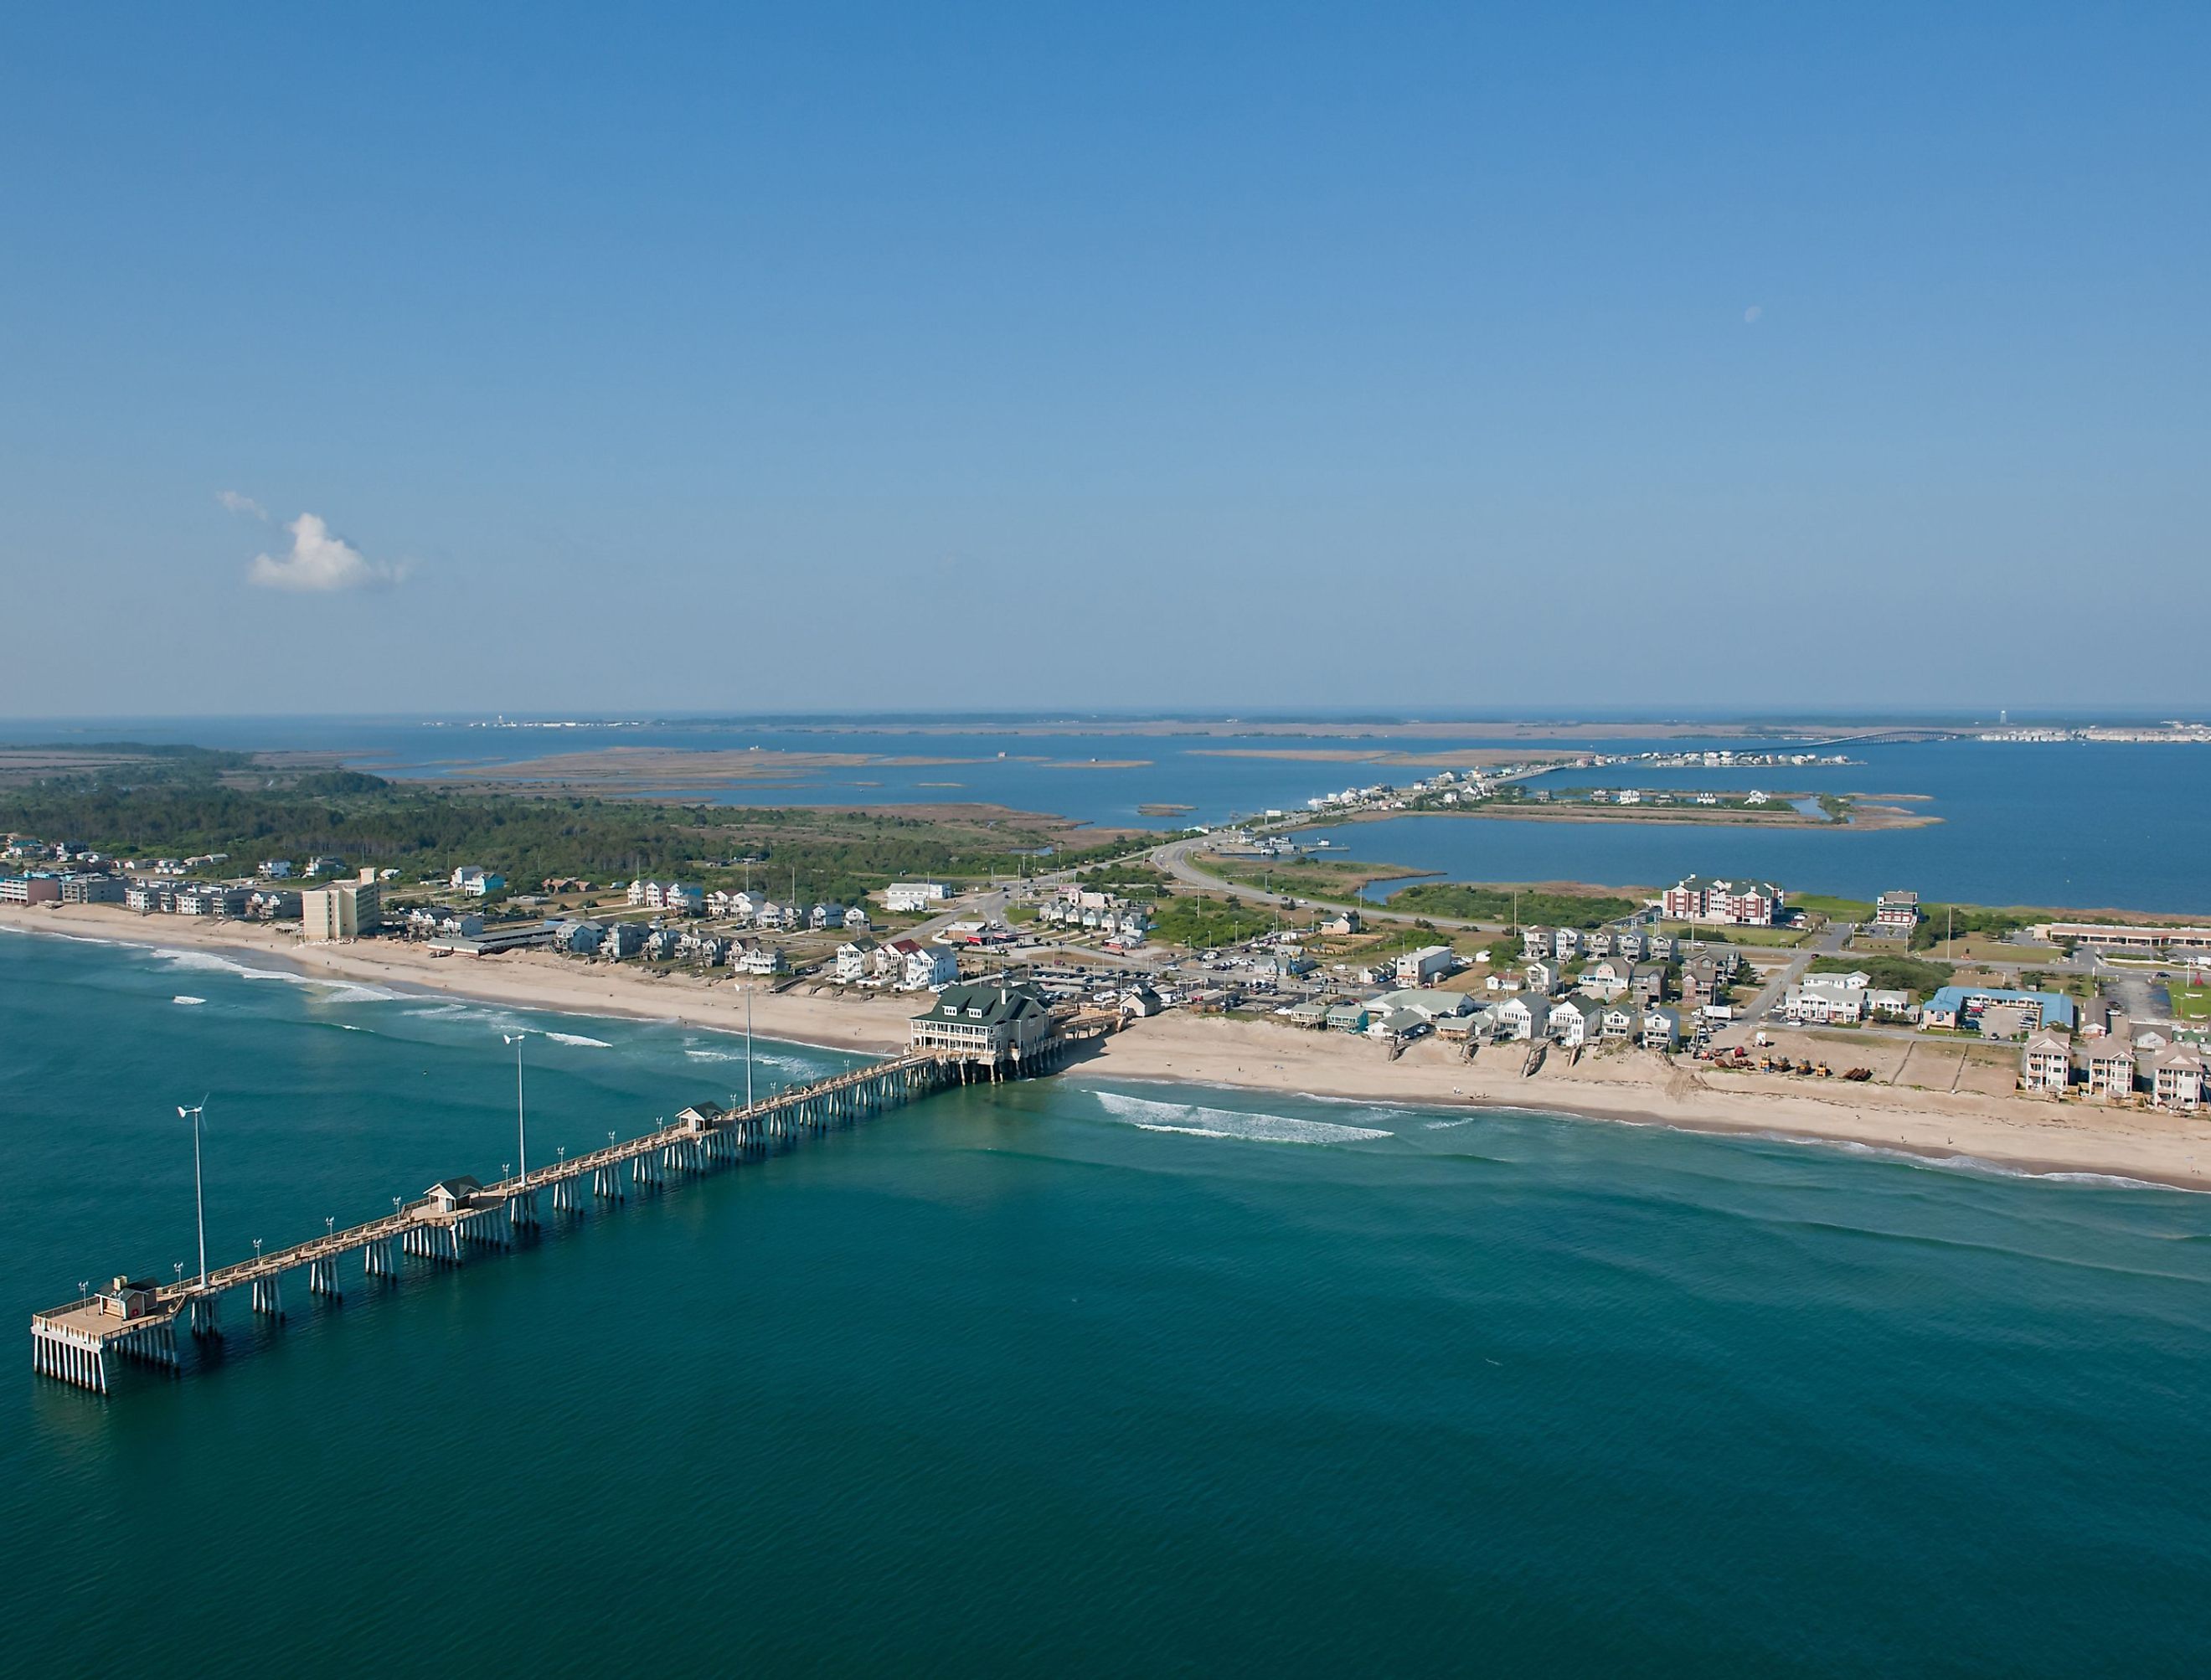 Aerial view of beach and outer banks at Nags Head, North Carolina. Image credit FloridaStock via shutterstock